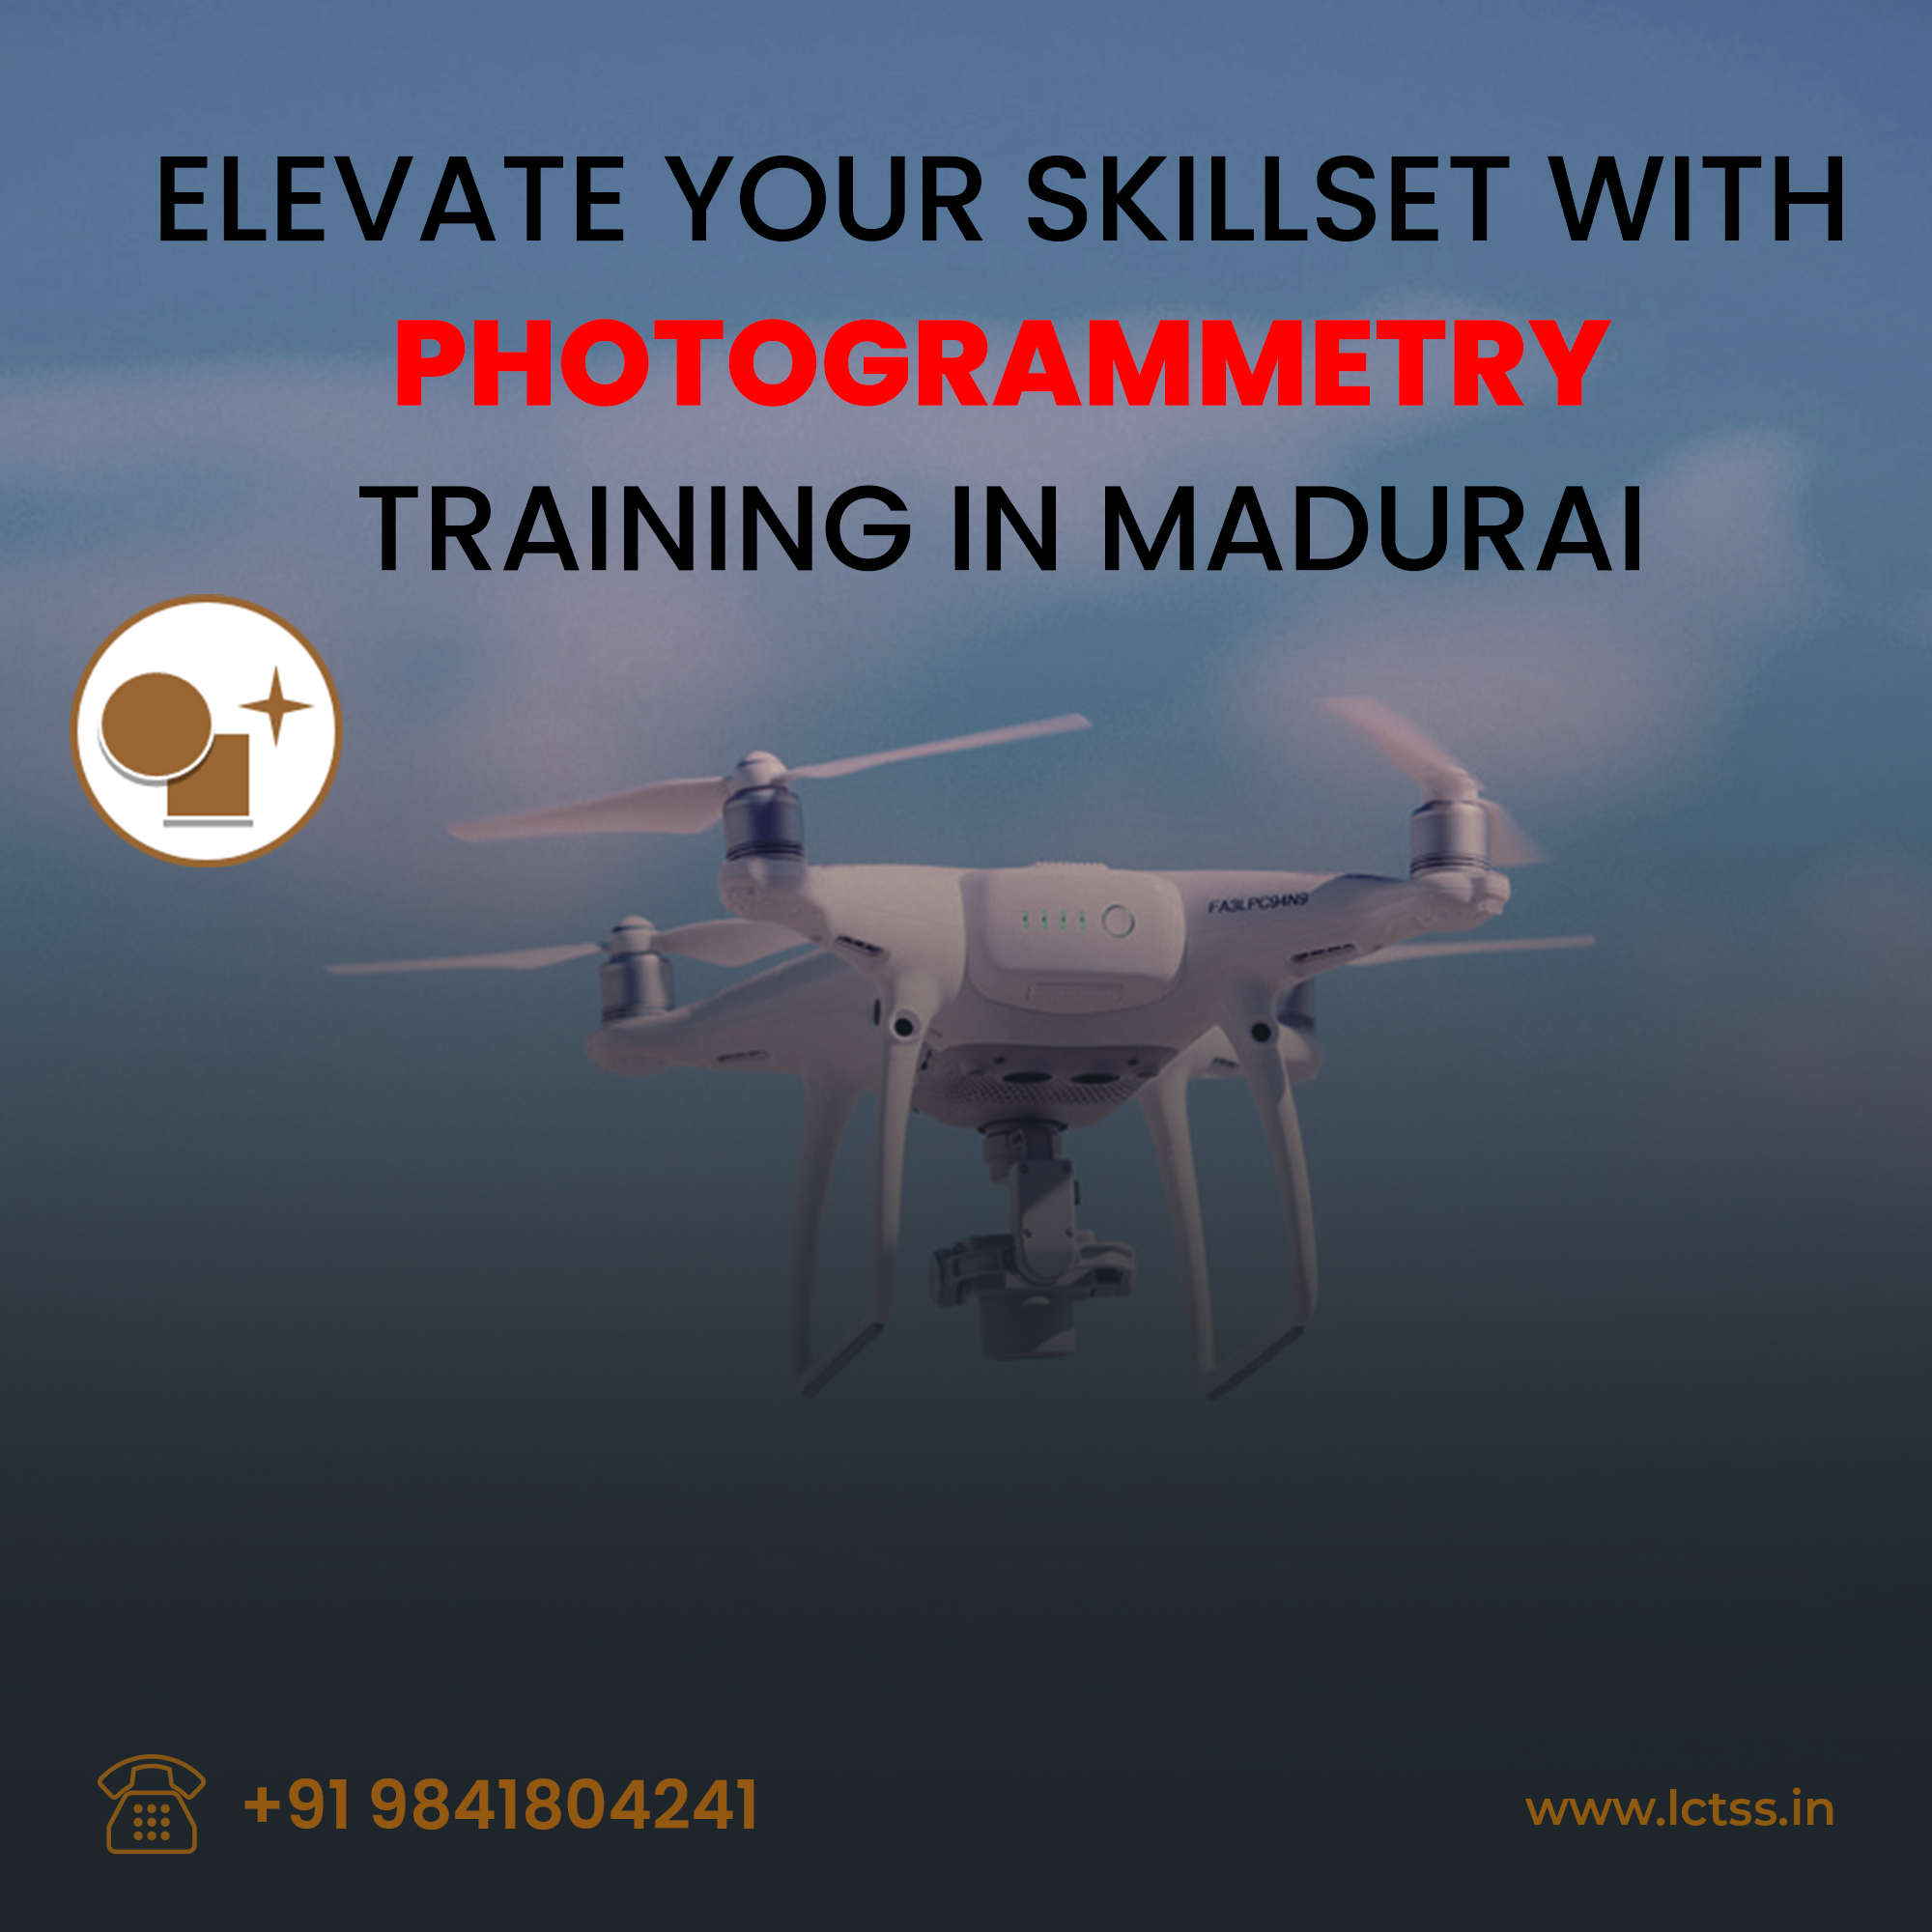 Elevate Your Skillset with Photogrammetry Professional Training in Madurai